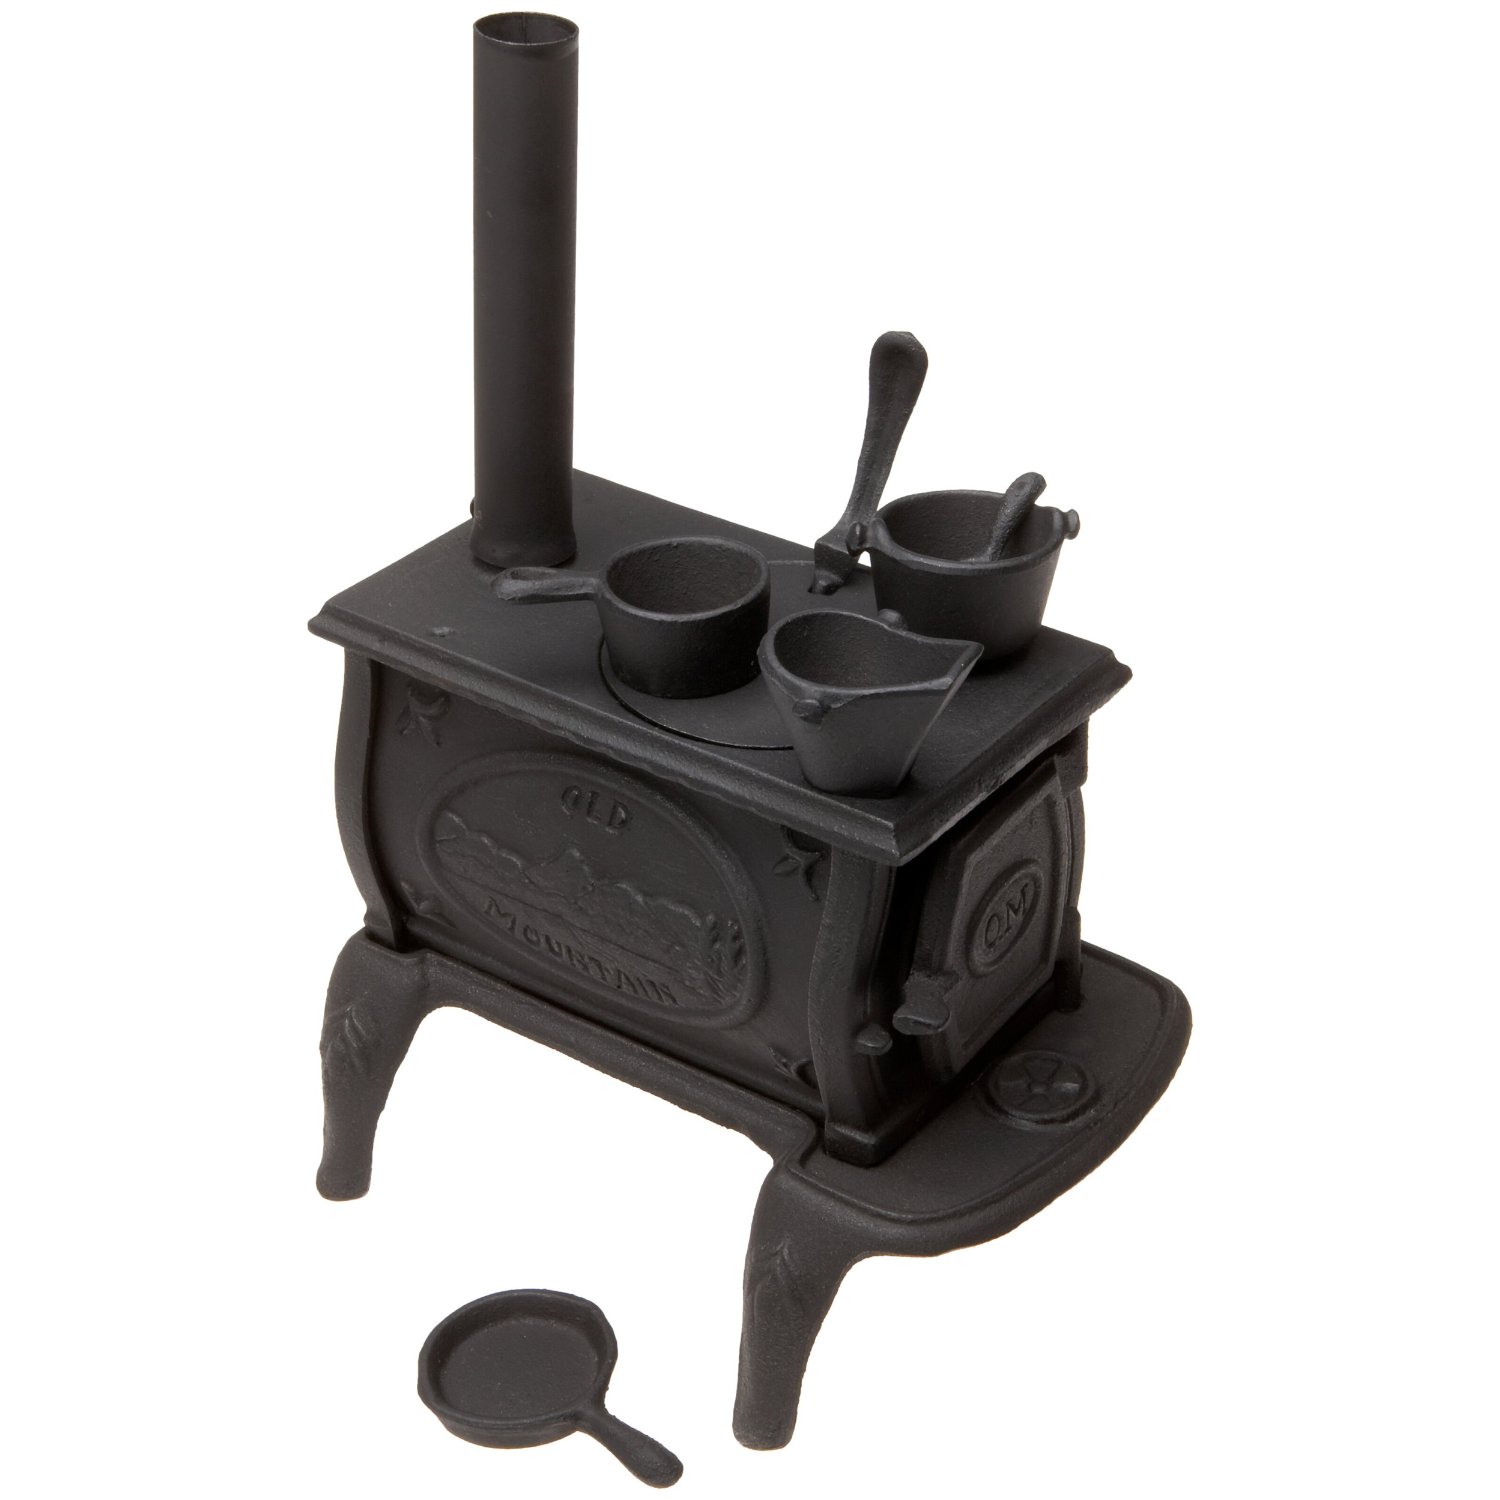 Old Mountain 10142 Black Mini Box Stove Set, with Accessories, 10 1/2 Inch Tall